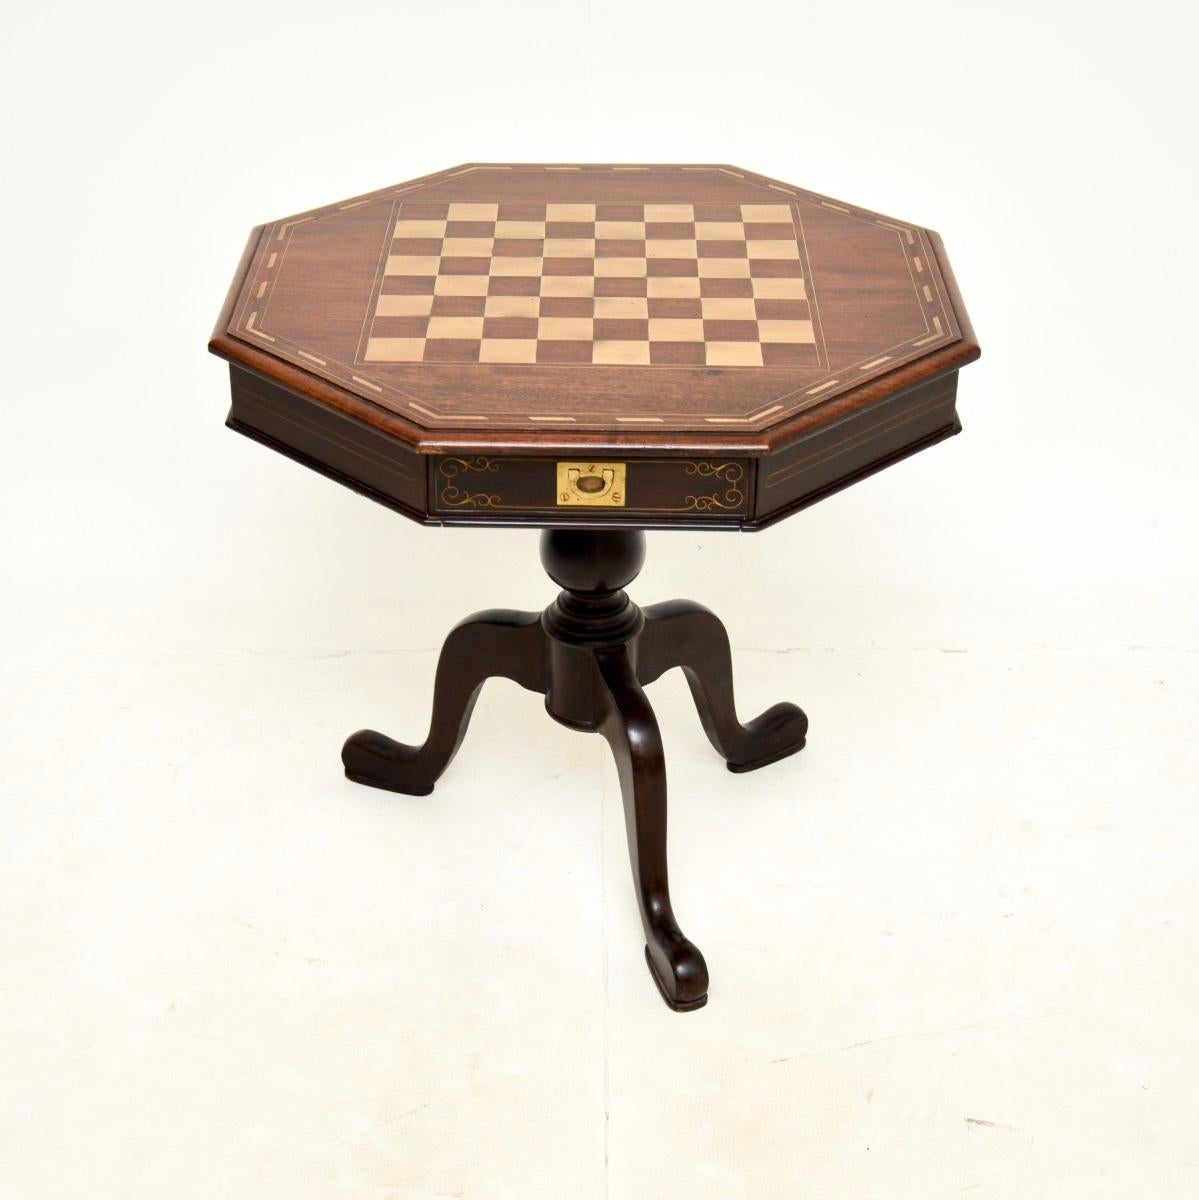 A wonderful antique inlaid brass side / chess table. This was made in England, it dates from around the 1950’s.

It is of lovey quality, the top is beautifully inlaid with a brass chessboard and inlaid brass borders. There are two useful drawers on